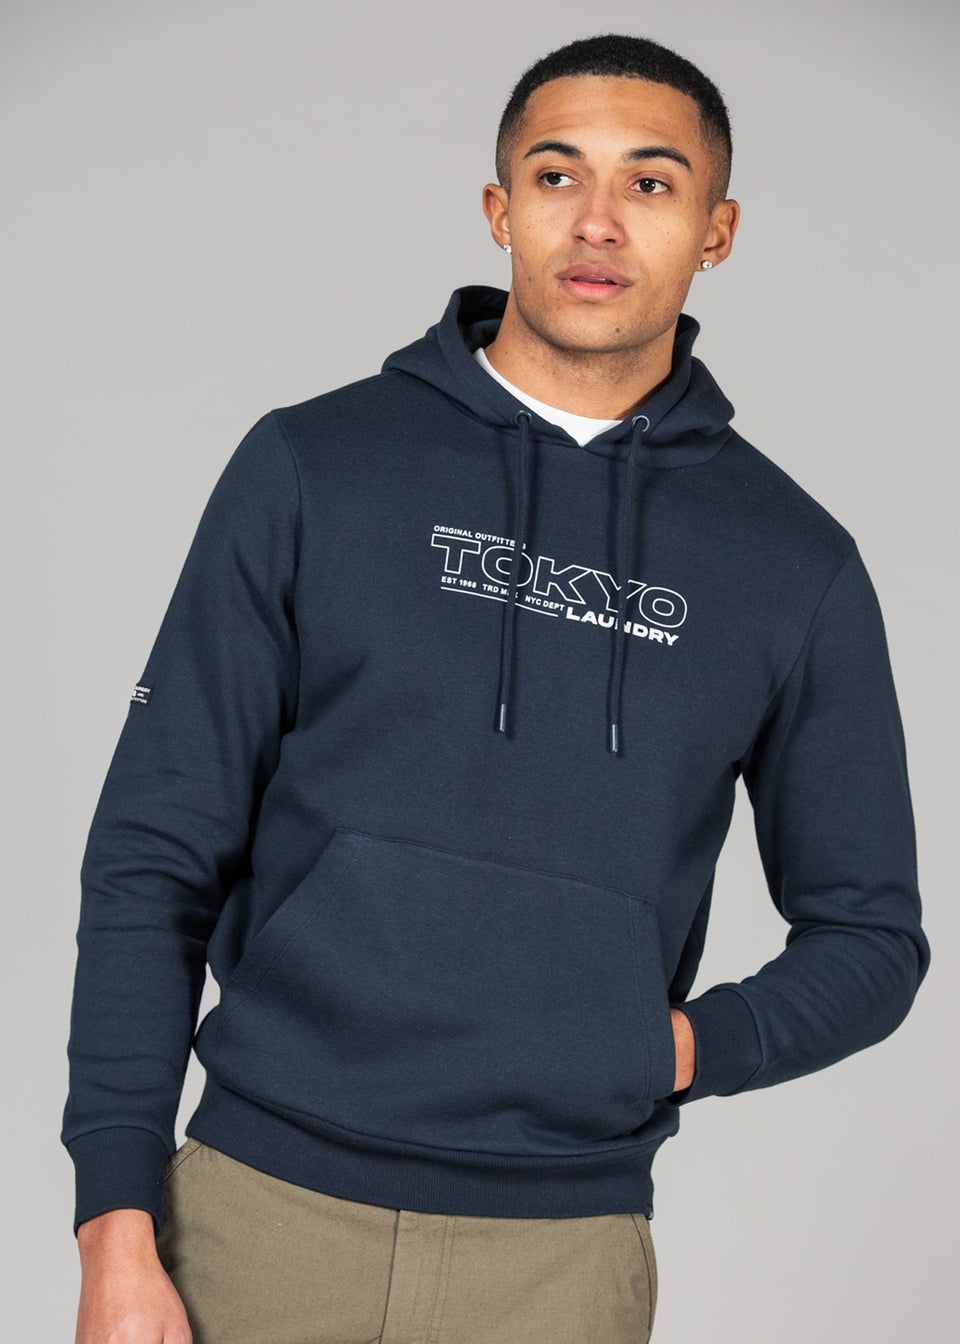 Tokyo Laundry Navy Cotton Blend Hoody with Branding Print